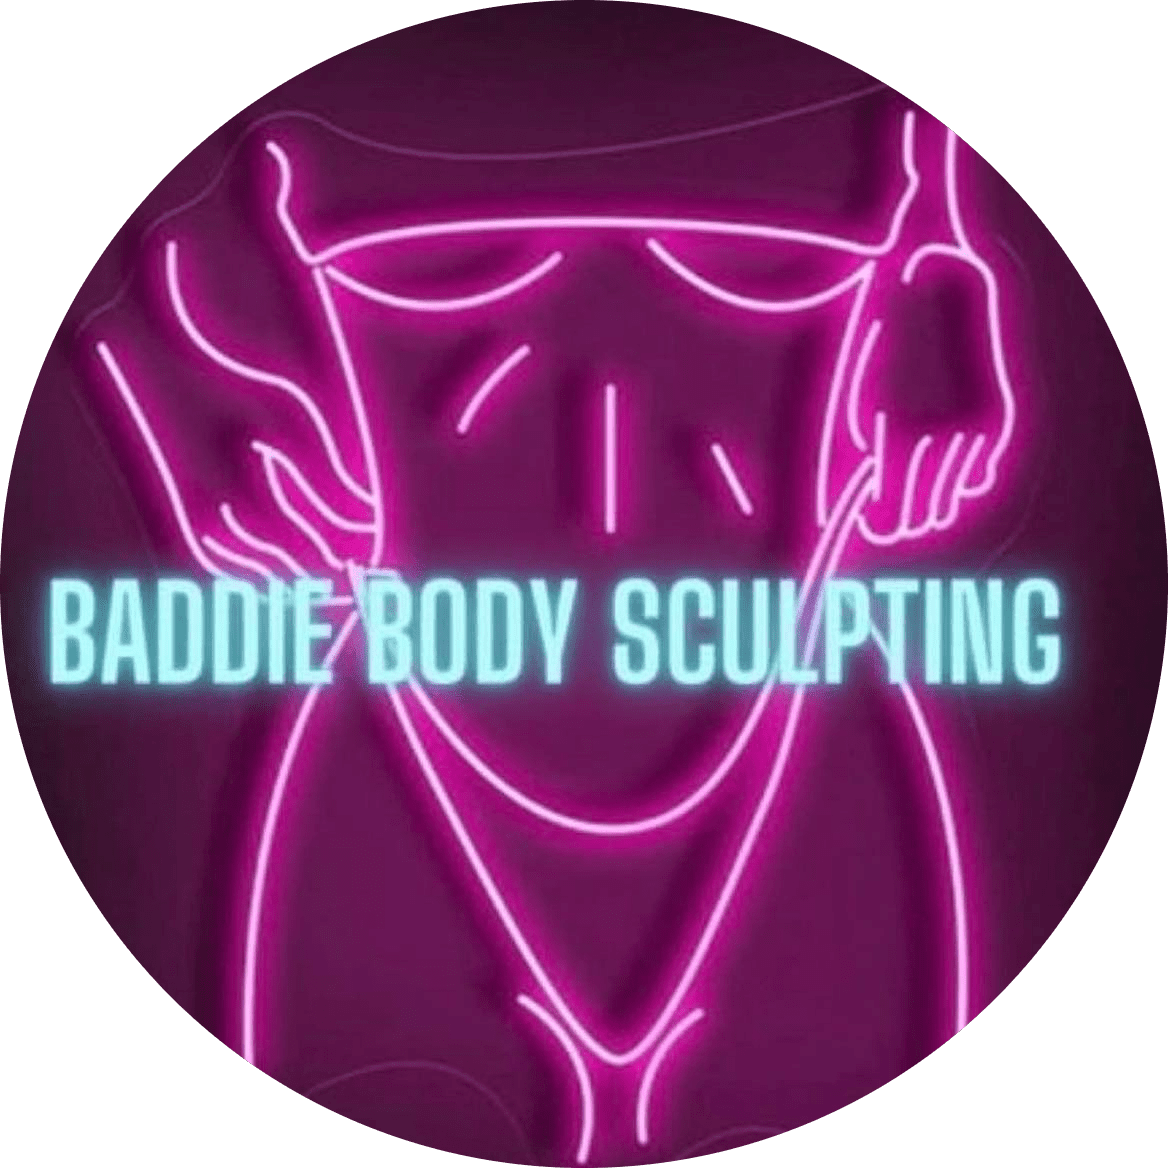 Baddie Body Sculpting | West Covina Body Sculpting & Weight Loss Experts